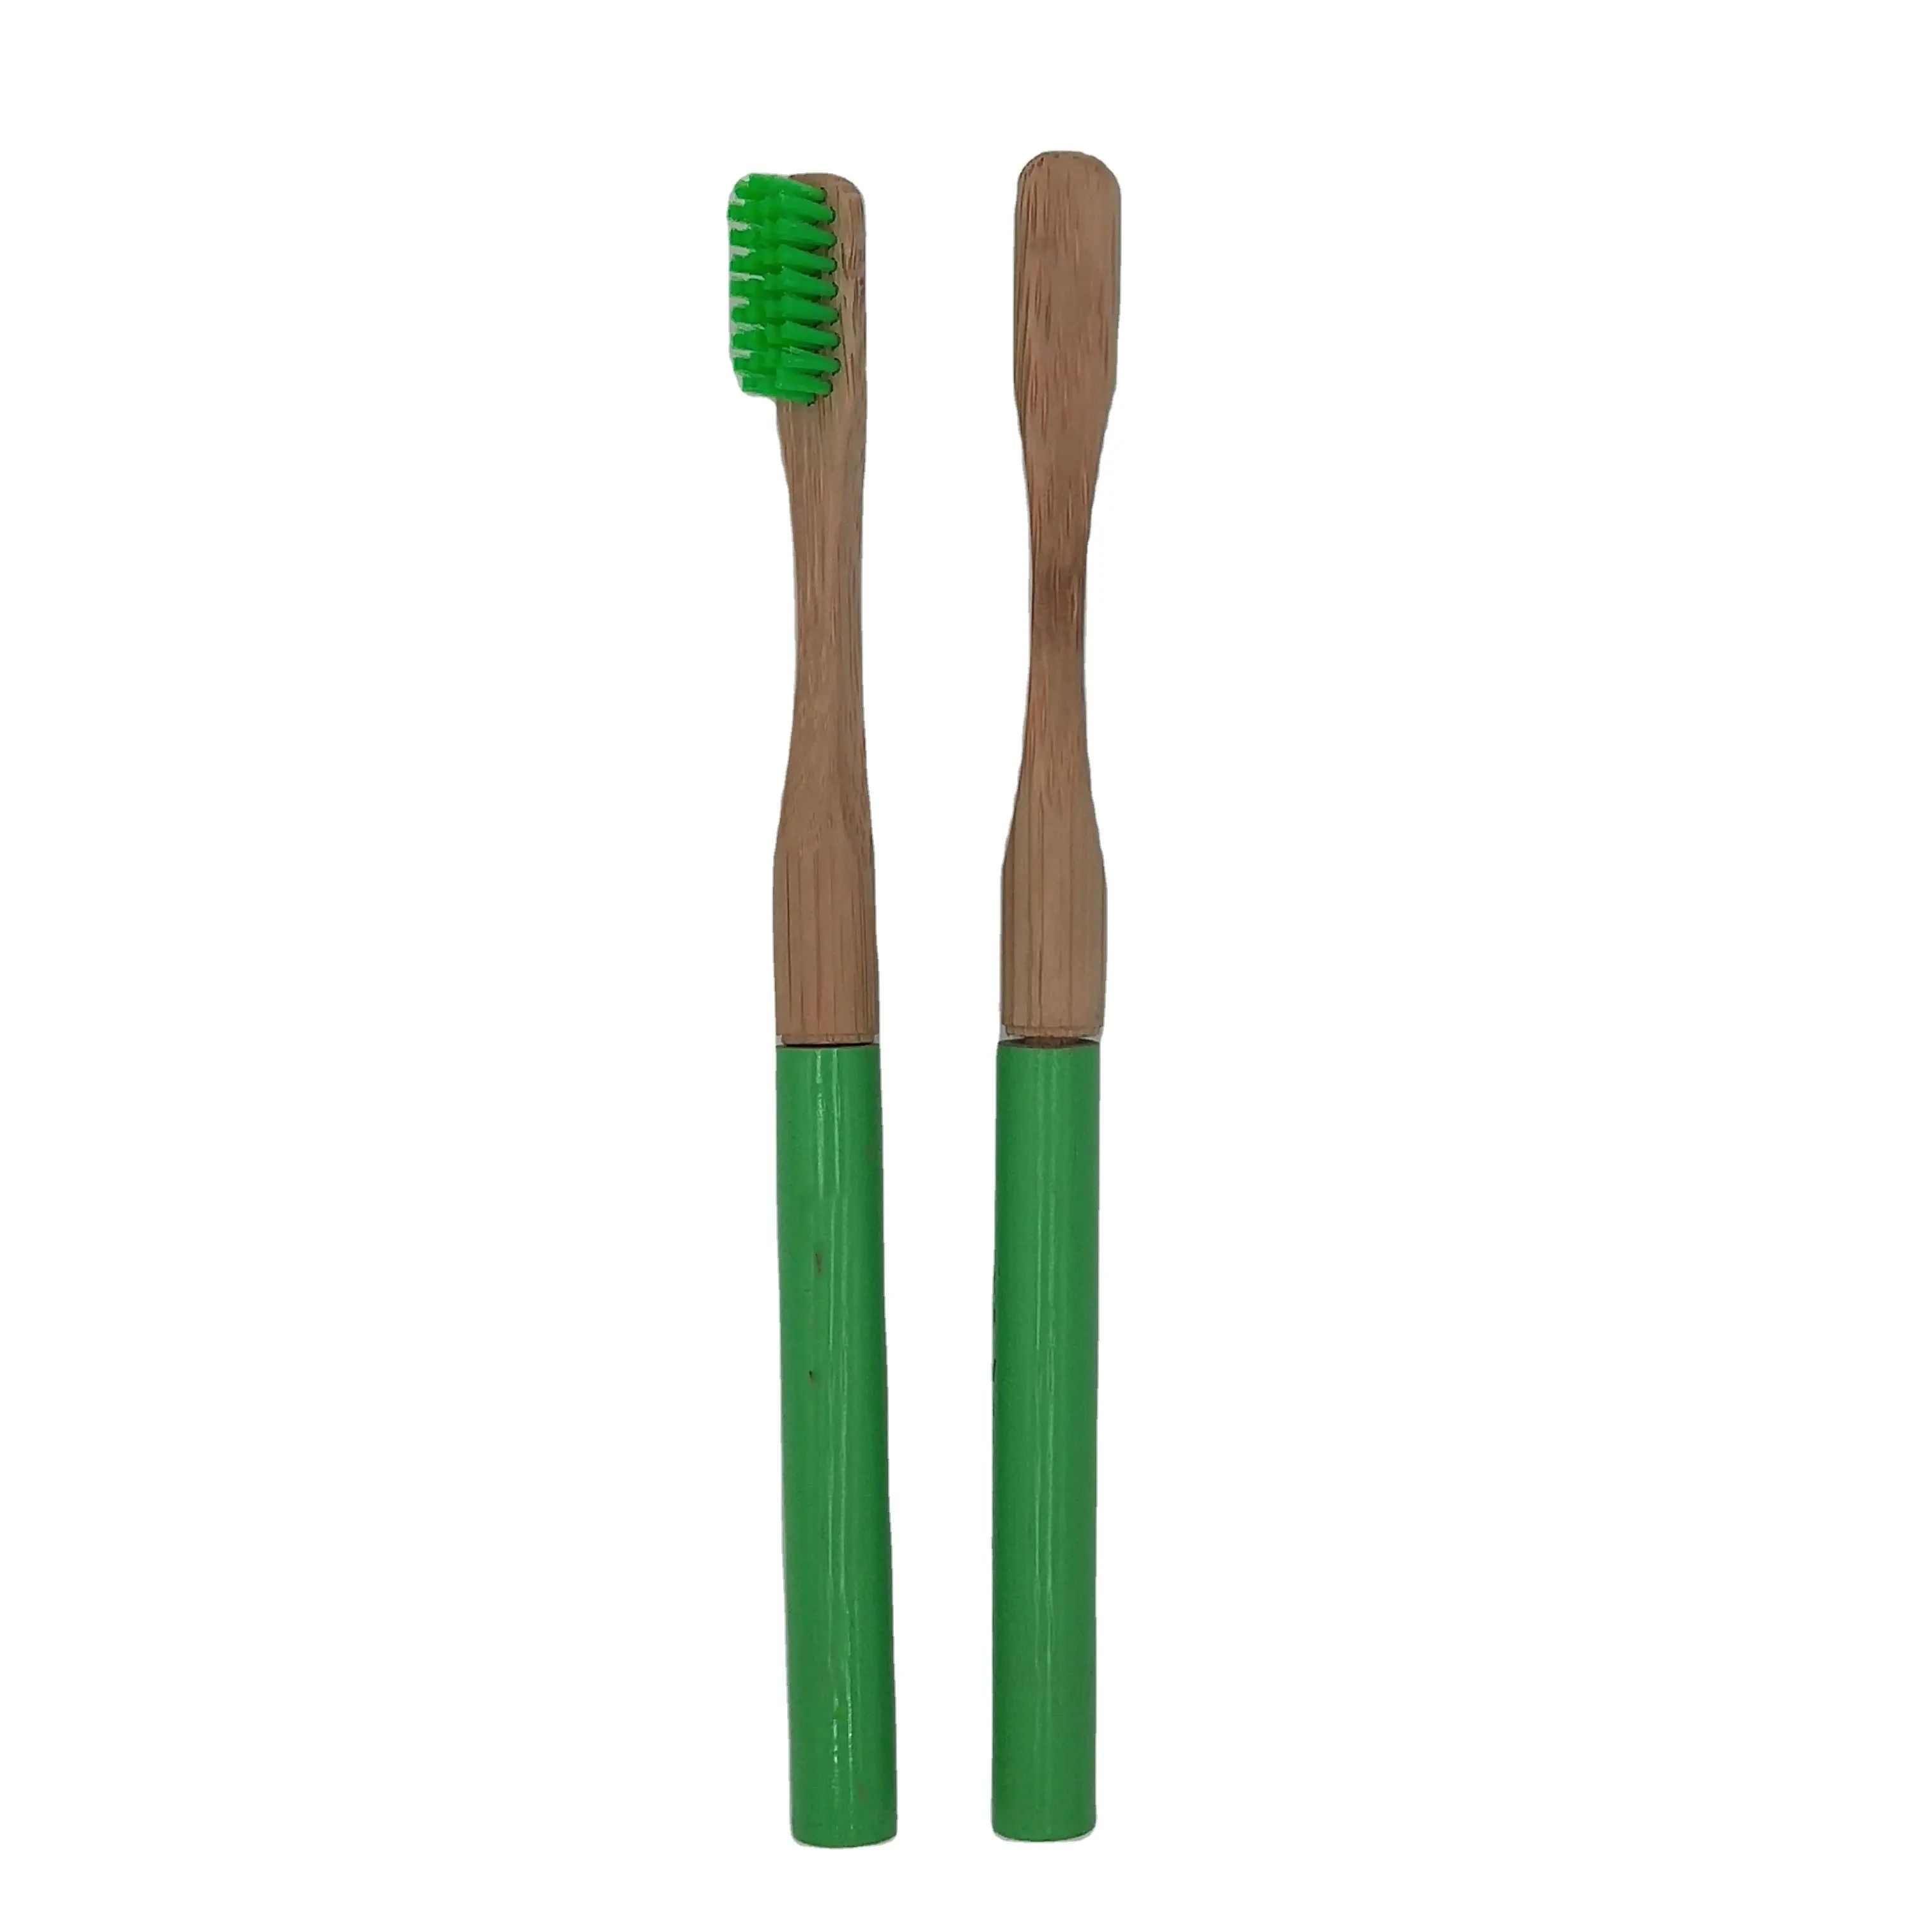 Factory-Made Natural Bamboo Toothbrush with Wooden Bristles for Home Use on Sale in UK NZ US AUSTRALIA